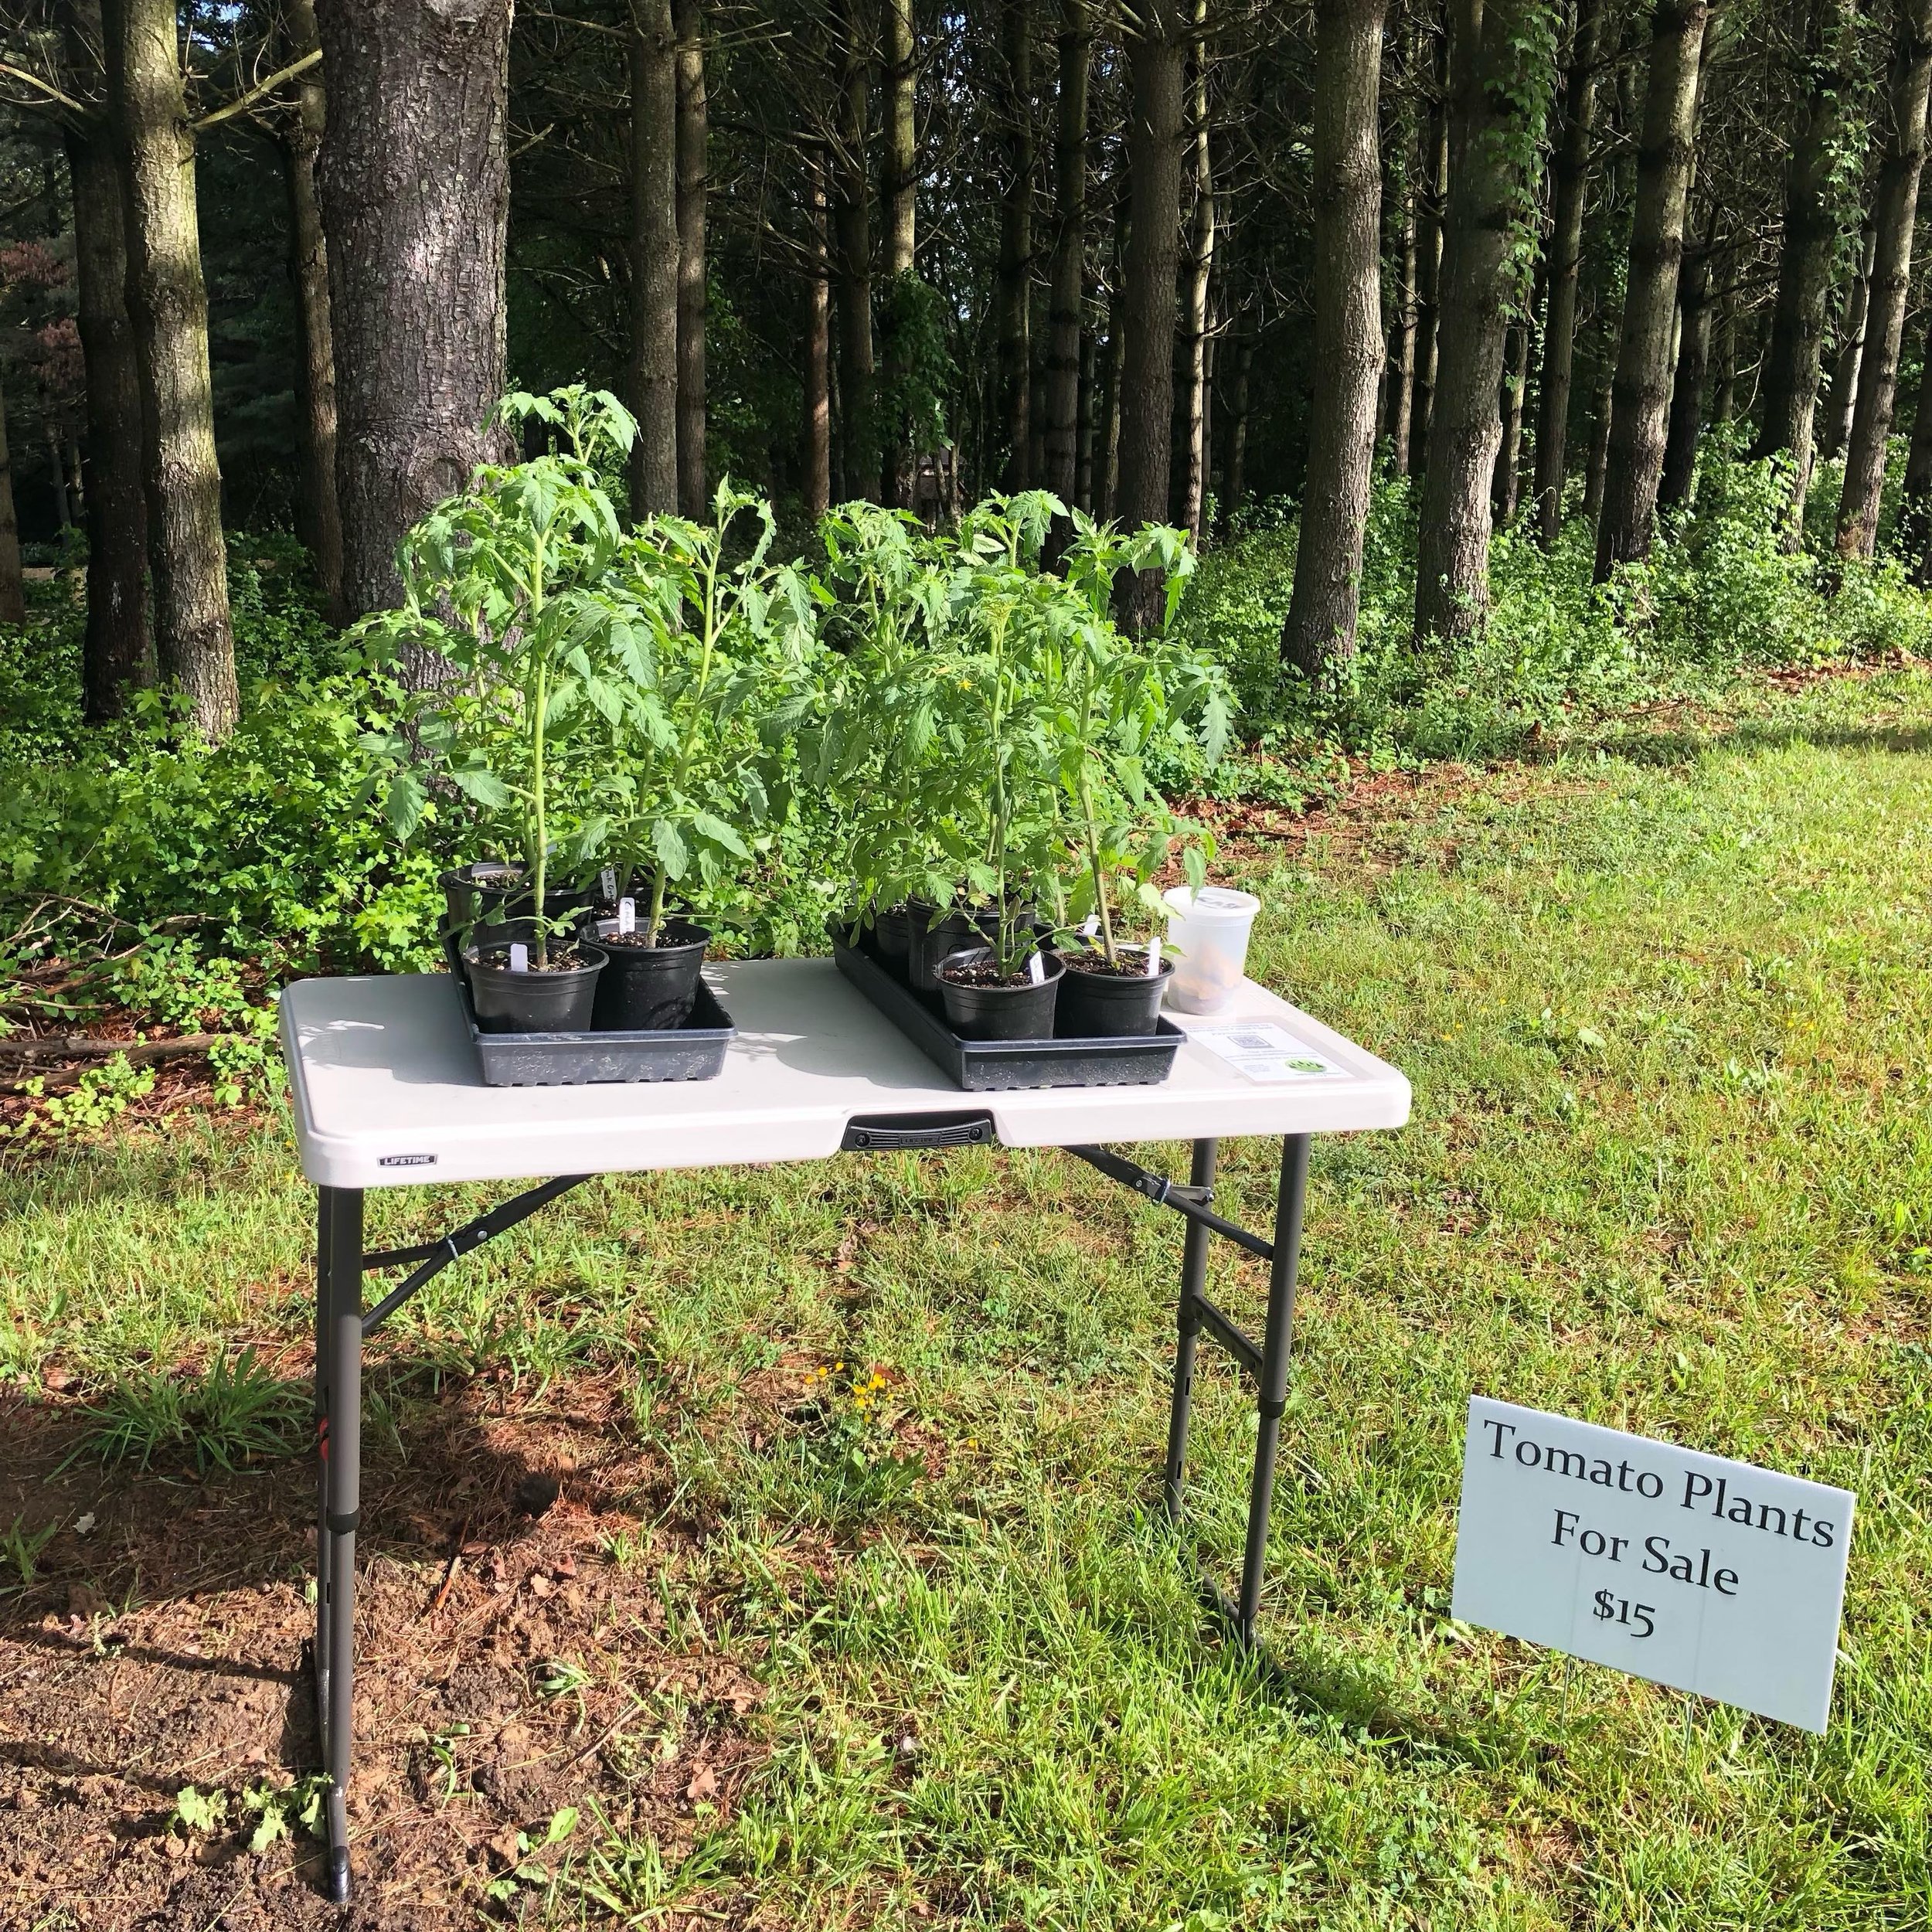 Tomato plants for sale! It&rsquo;s a perfect weekend to plant tomatoes out into your garden or patio containers. We have some of the best varieties for you to choose from. Ranging from cherry to beefsteak, heirloom, and hybrid. Sun gold, citrine, bla